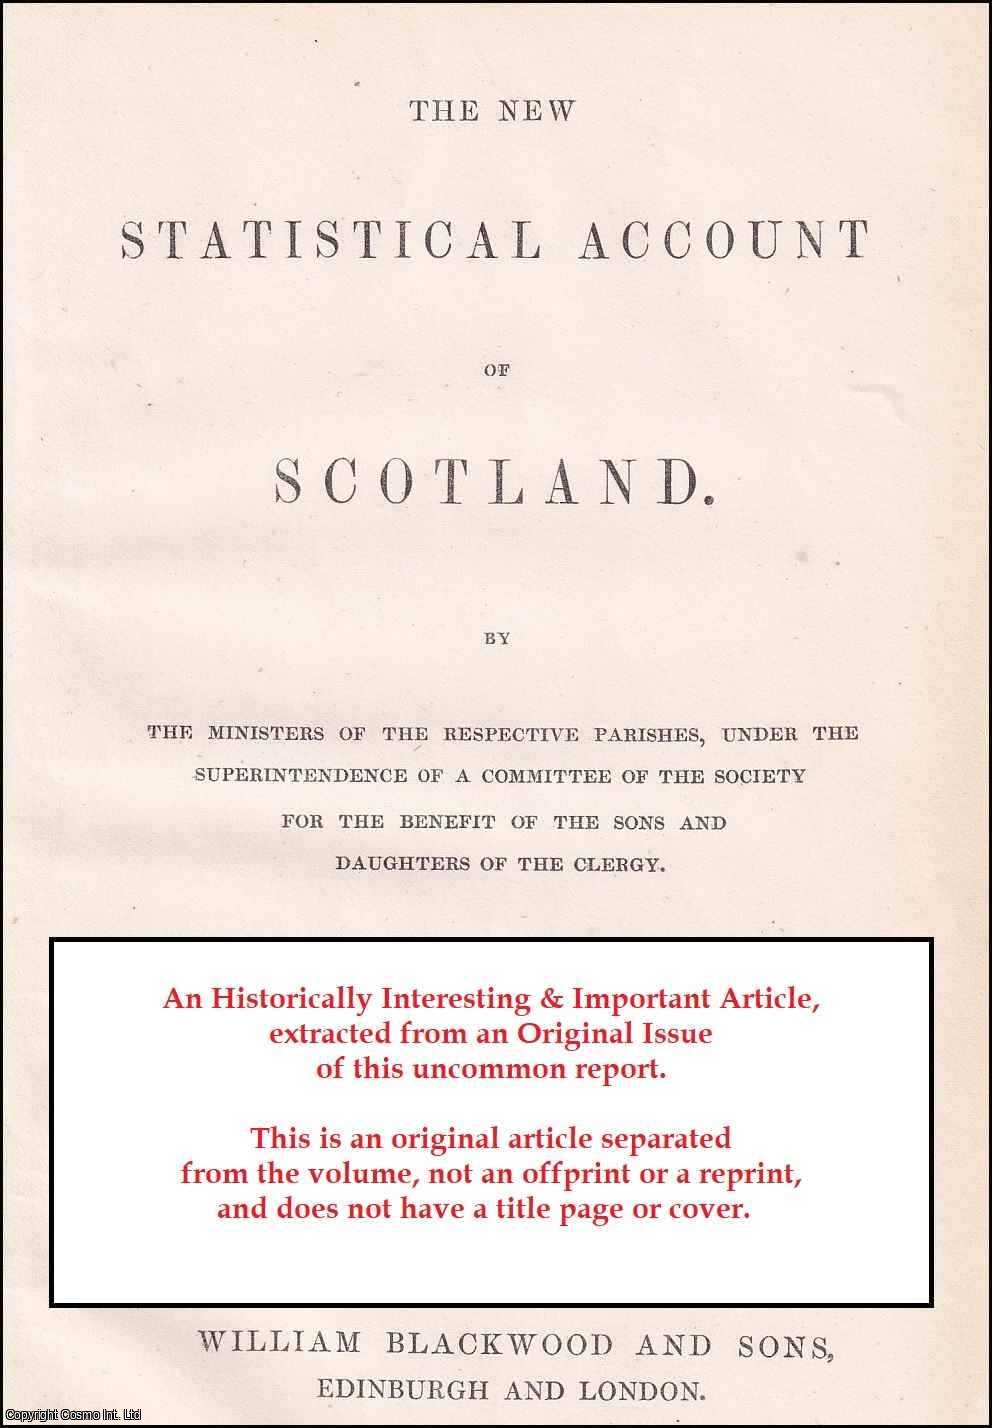 Rev. Coll Macdonald - Parish of Portree. Presbytery of Skye, Synod of Glenelg. An uncommon original article from The New Statistical Account of Scotland, 1845.